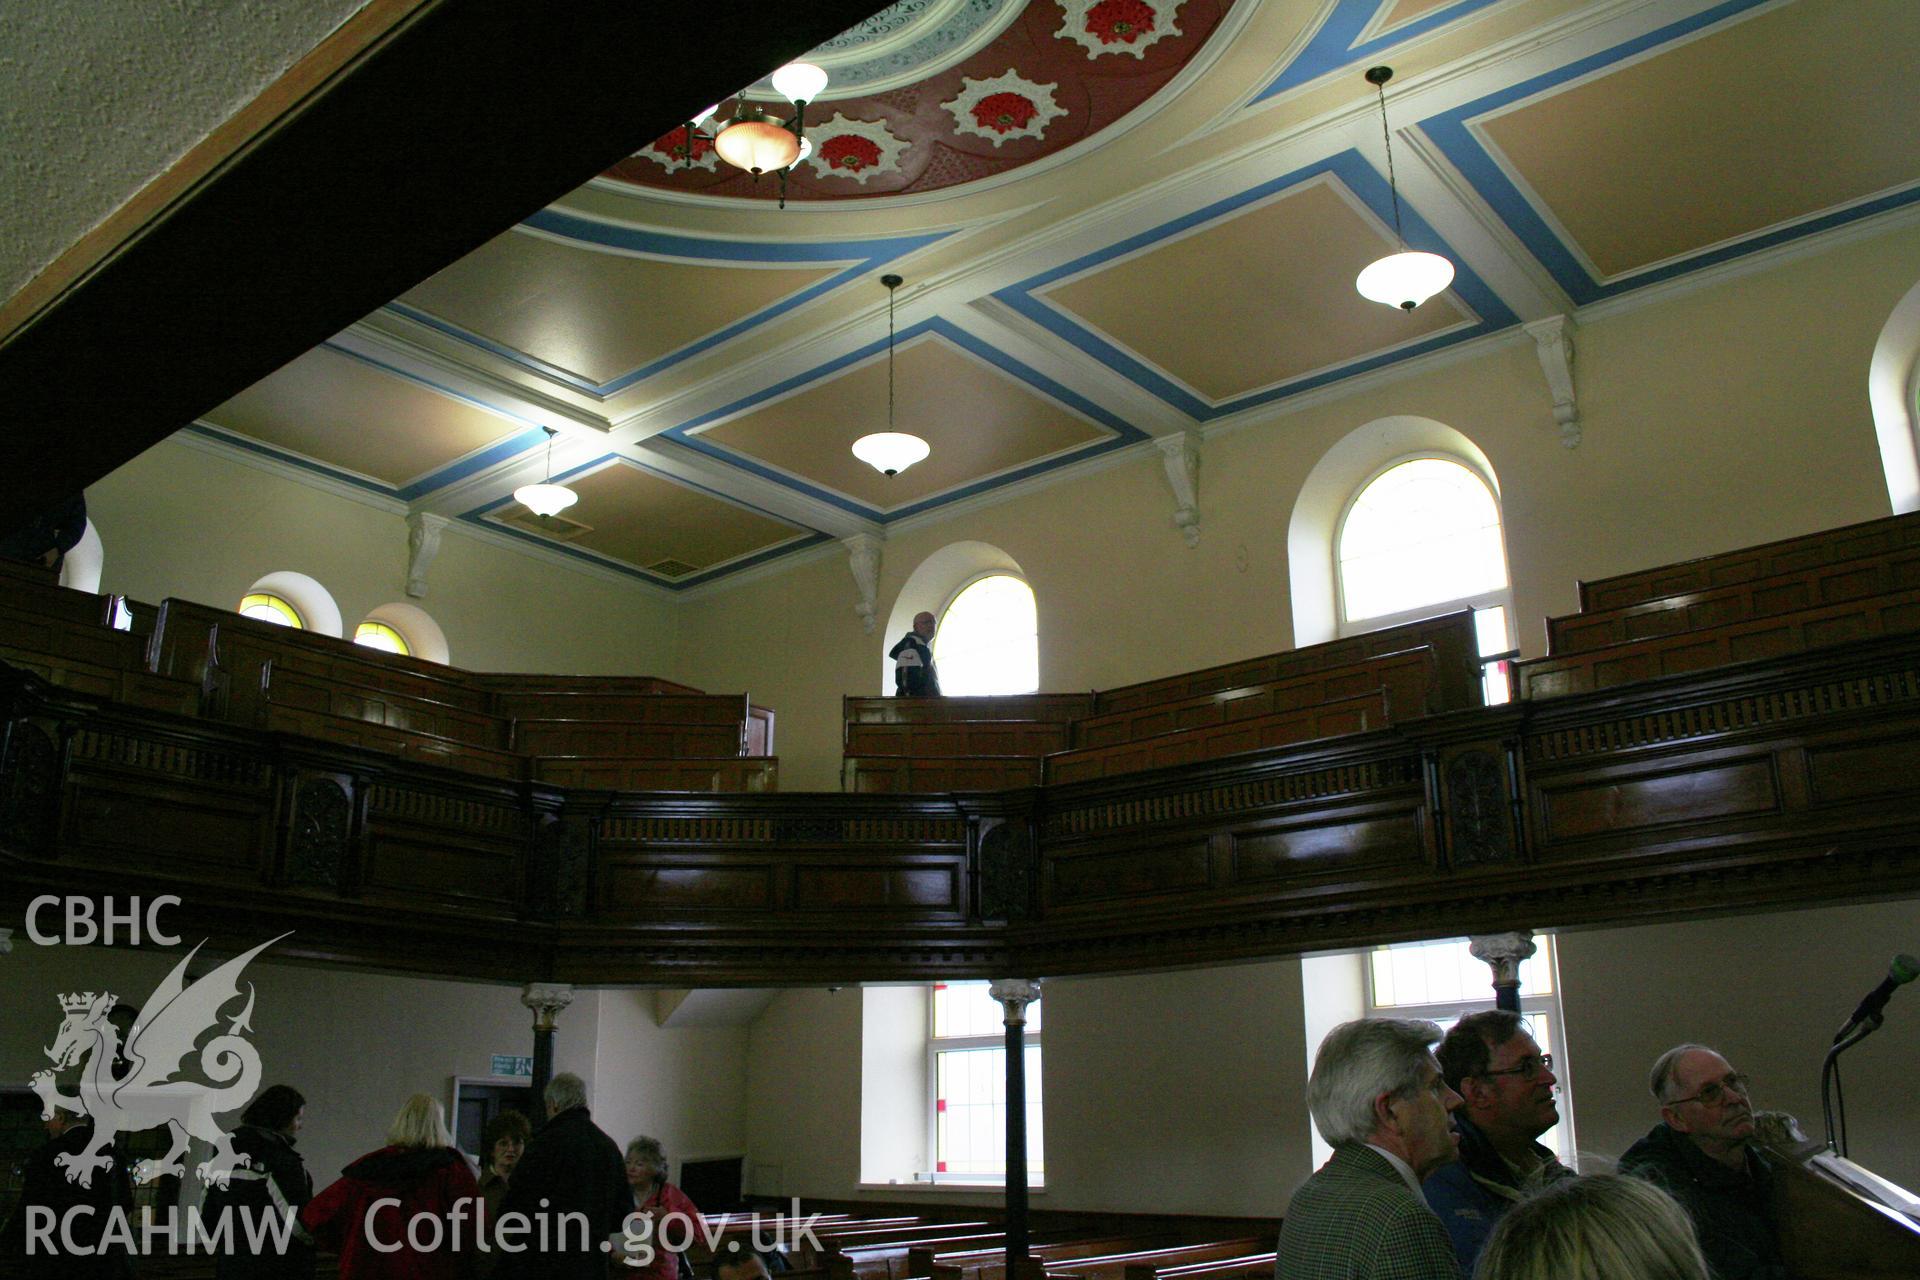 Internal, view of gallery and ceiling detail